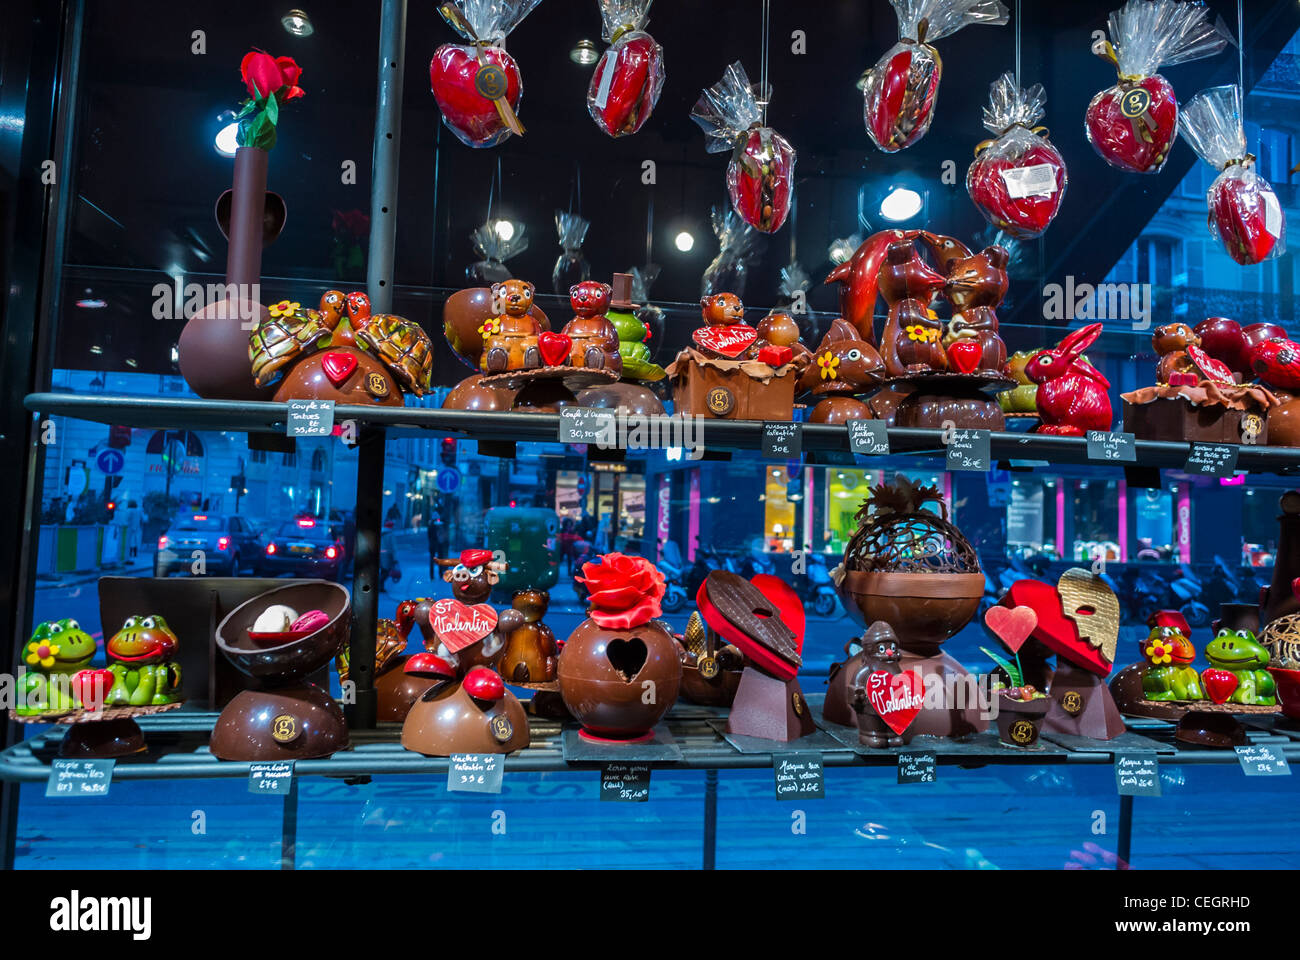 Paris, France, French Chocolatier Shop, 'Maison Georges Larnicol', pastries, Chocolate Heart Sculptures in Window display on shelves, 'Saint Valentine's Day', Stock Photo